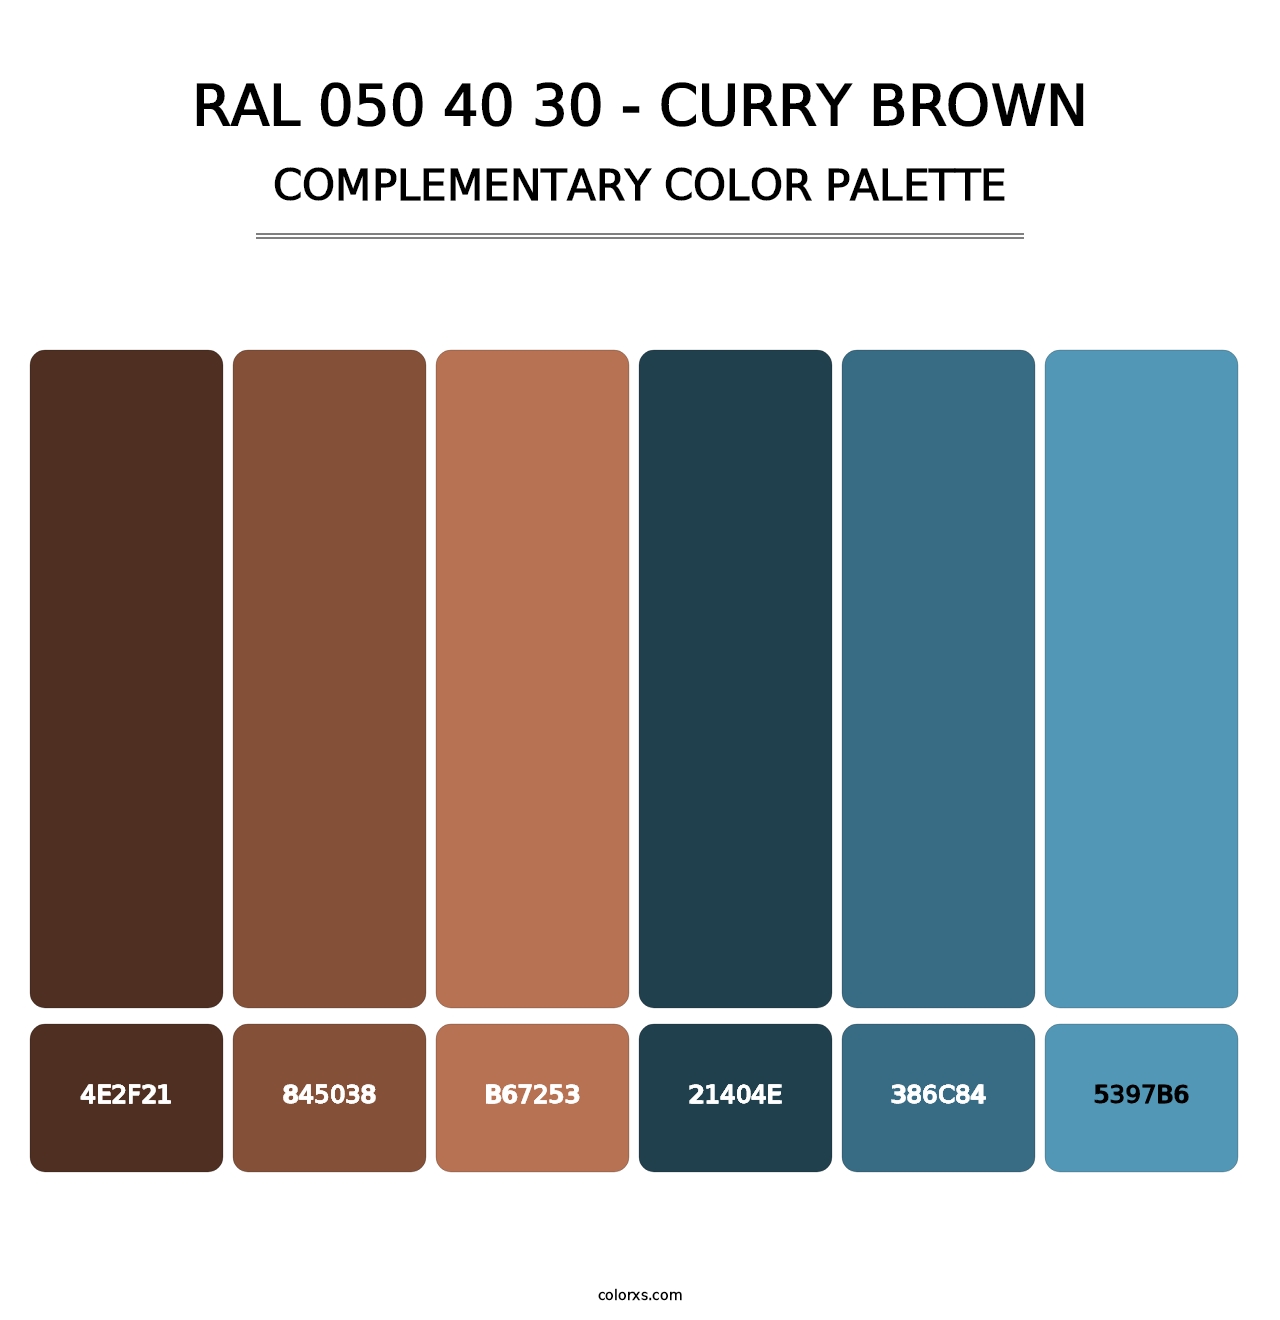 RAL 050 40 30 - Curry Brown - Complementary Color Palette